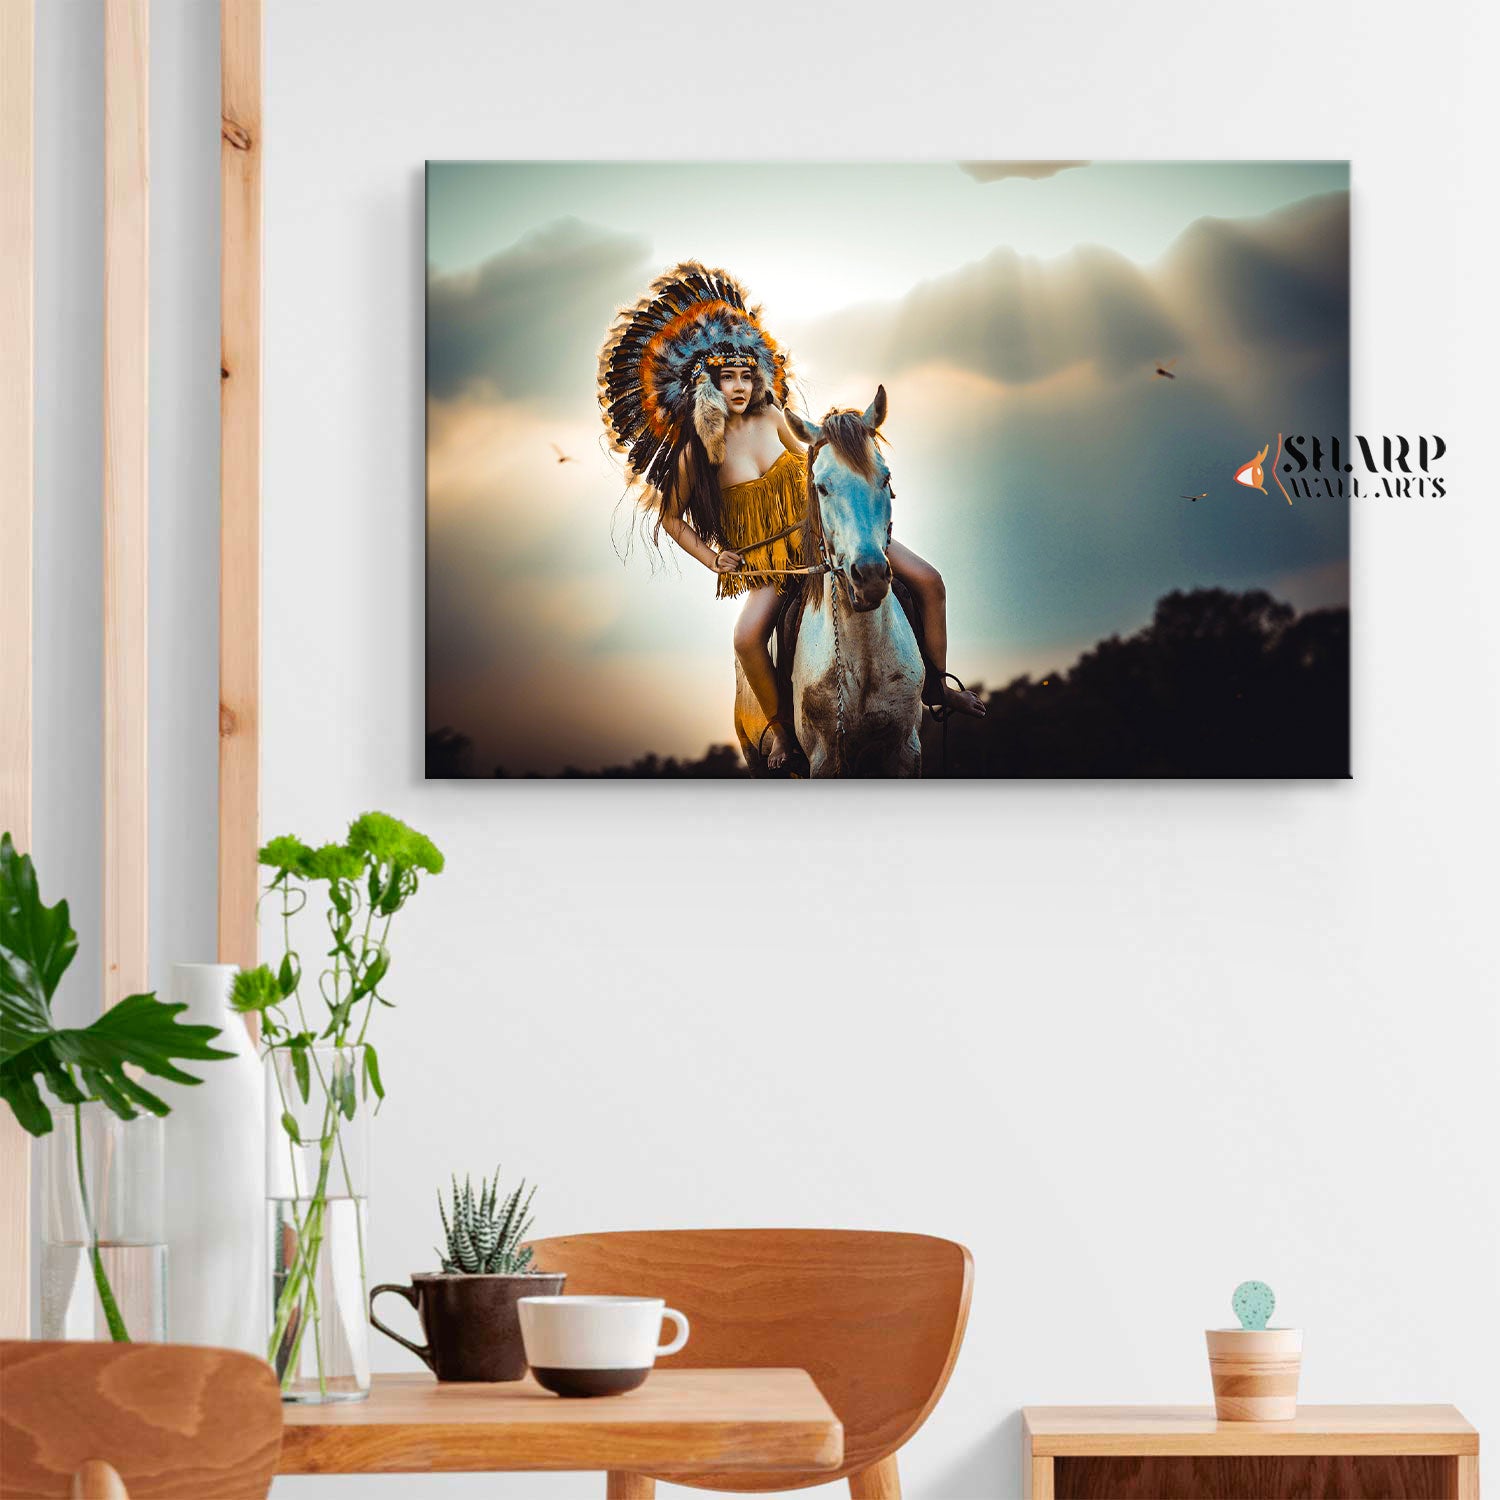 Native American Indian Riding A Horse Canvas Wall Art